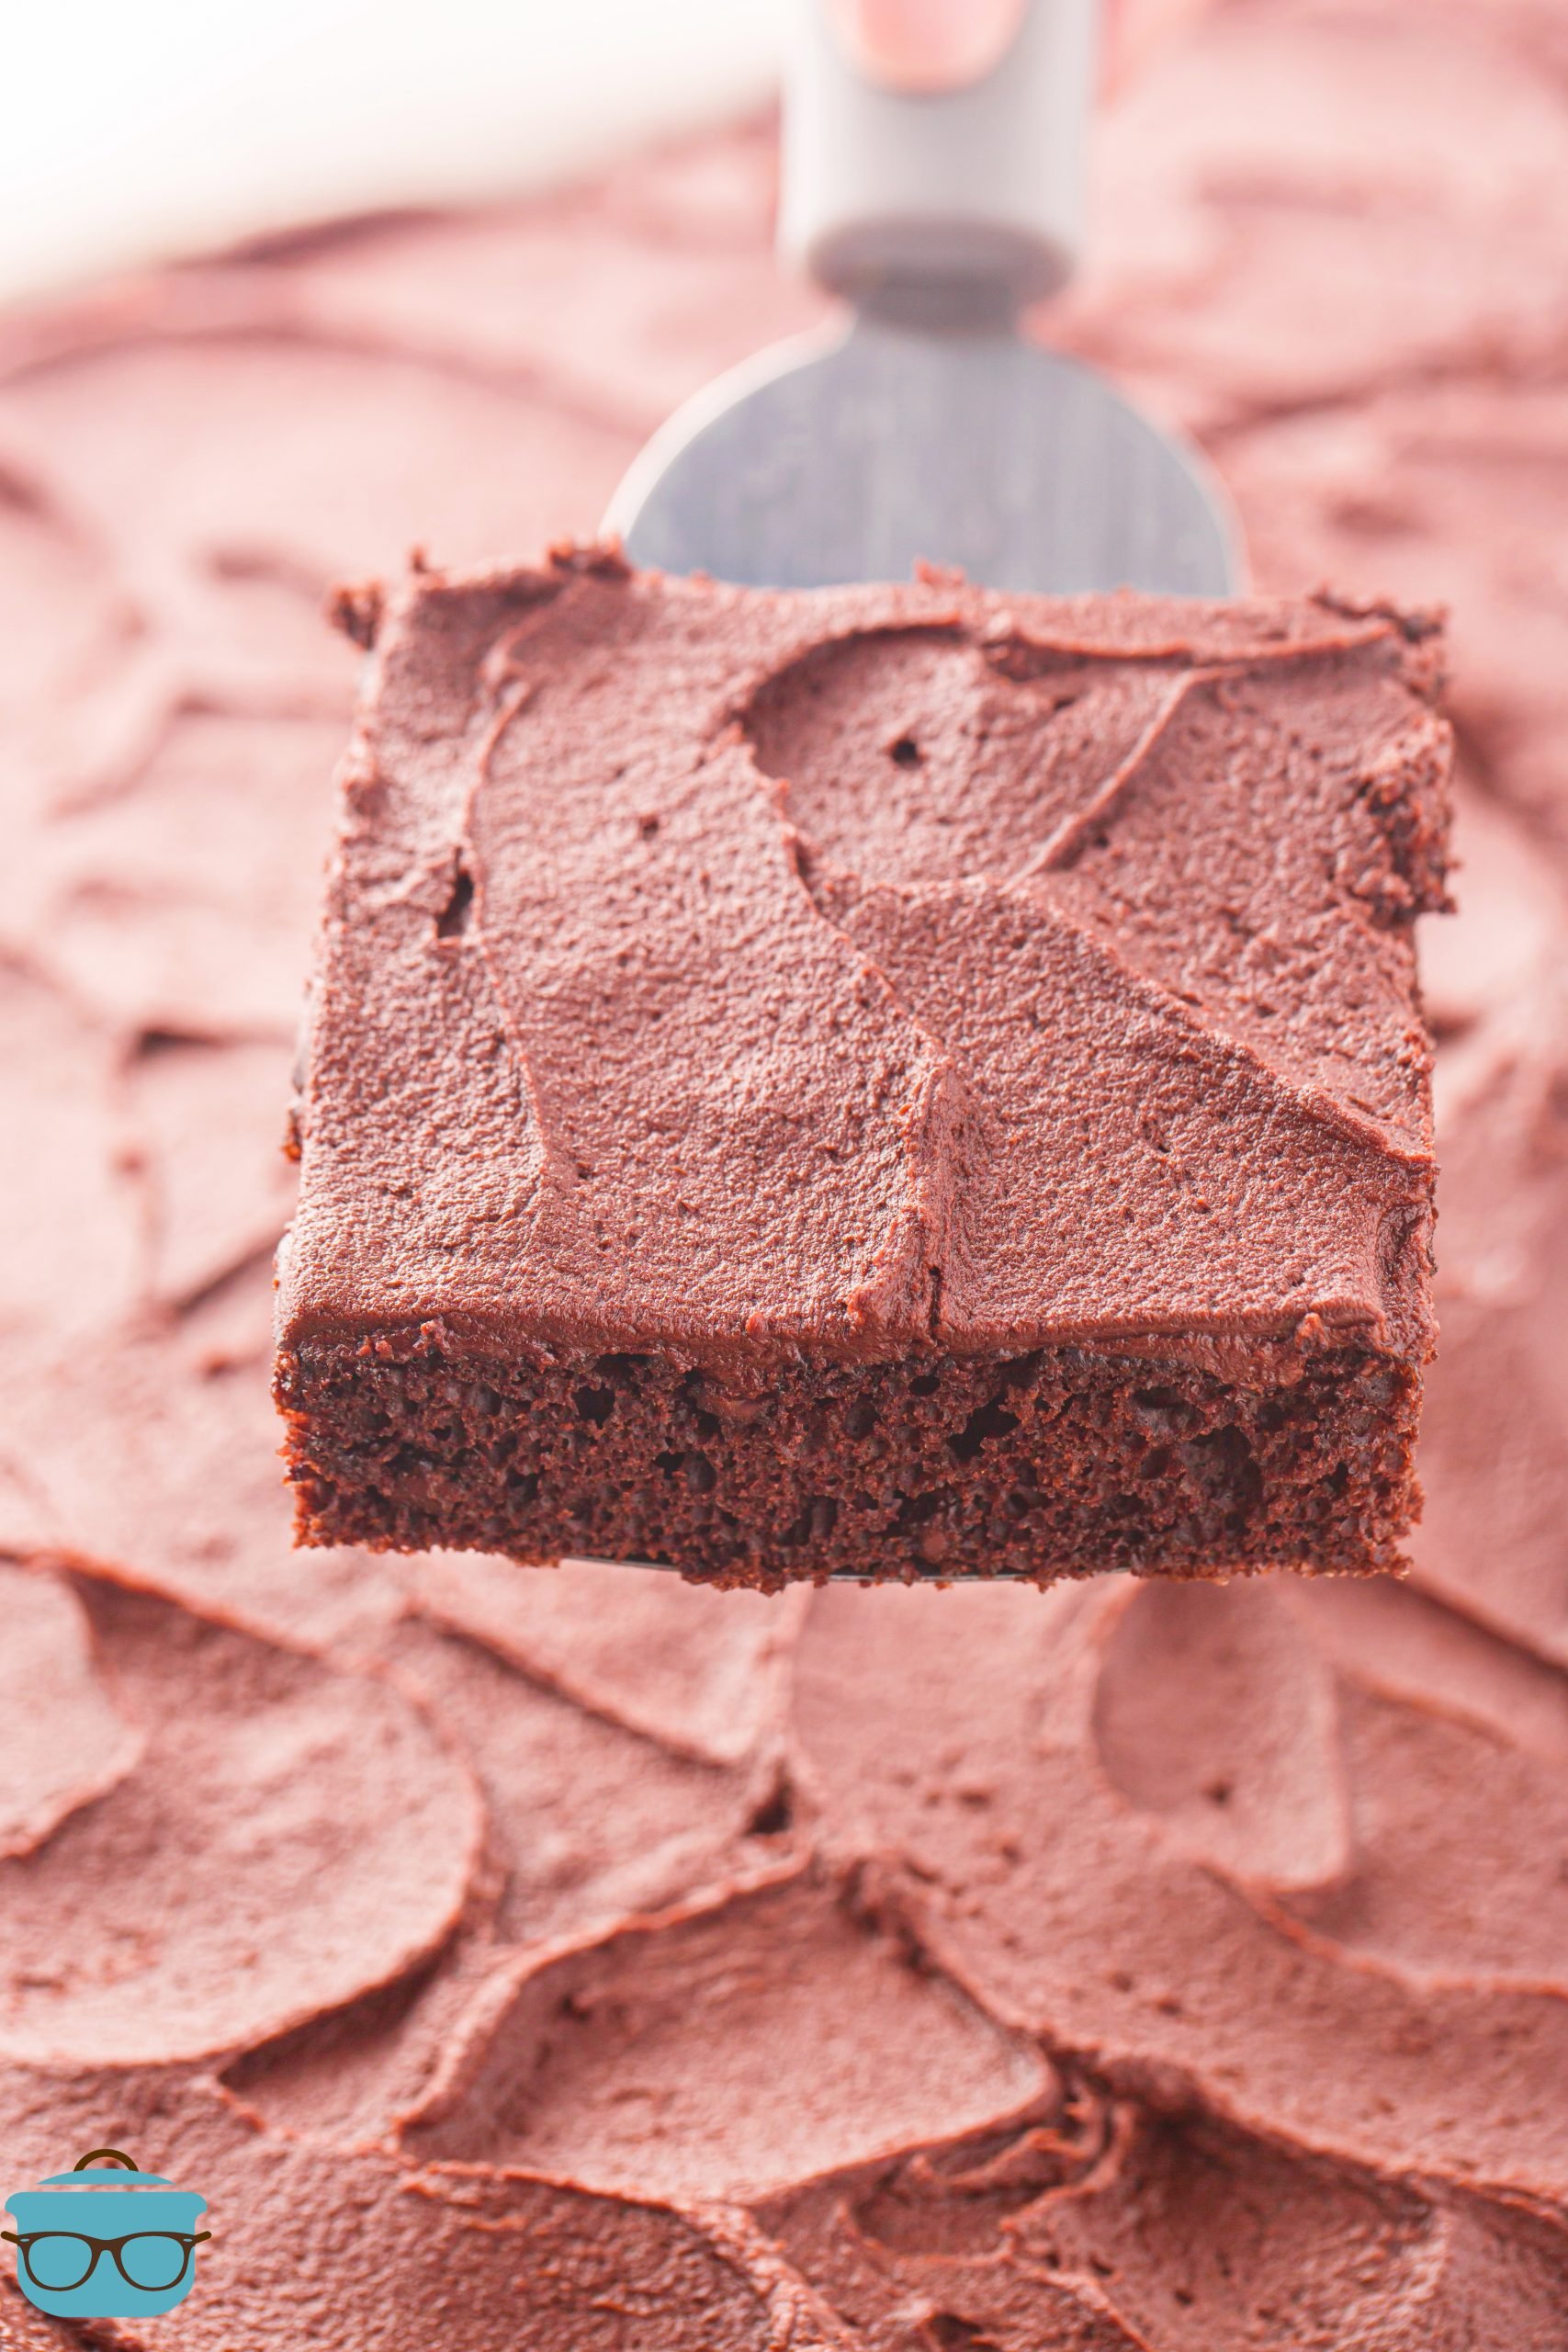 A serving utensil holding a slice of Chocolate Sheet Cake.